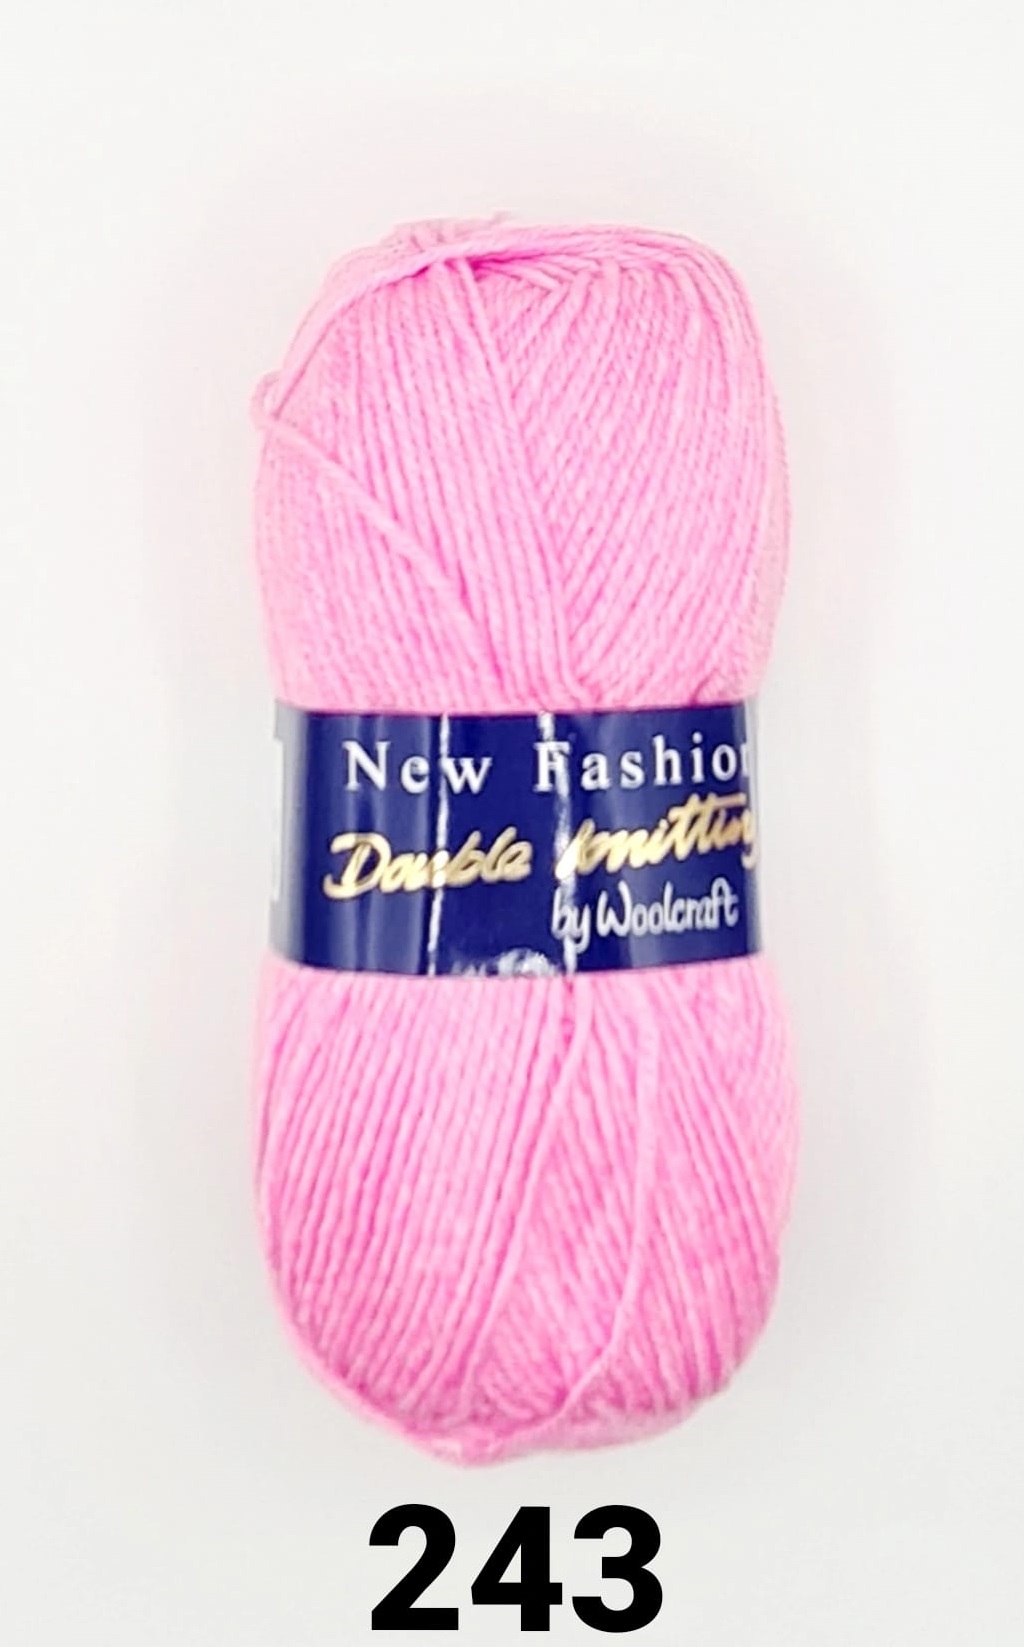 New Fashion DK Yarn 10 Pack Candy Mist 243 - Click Image to Close